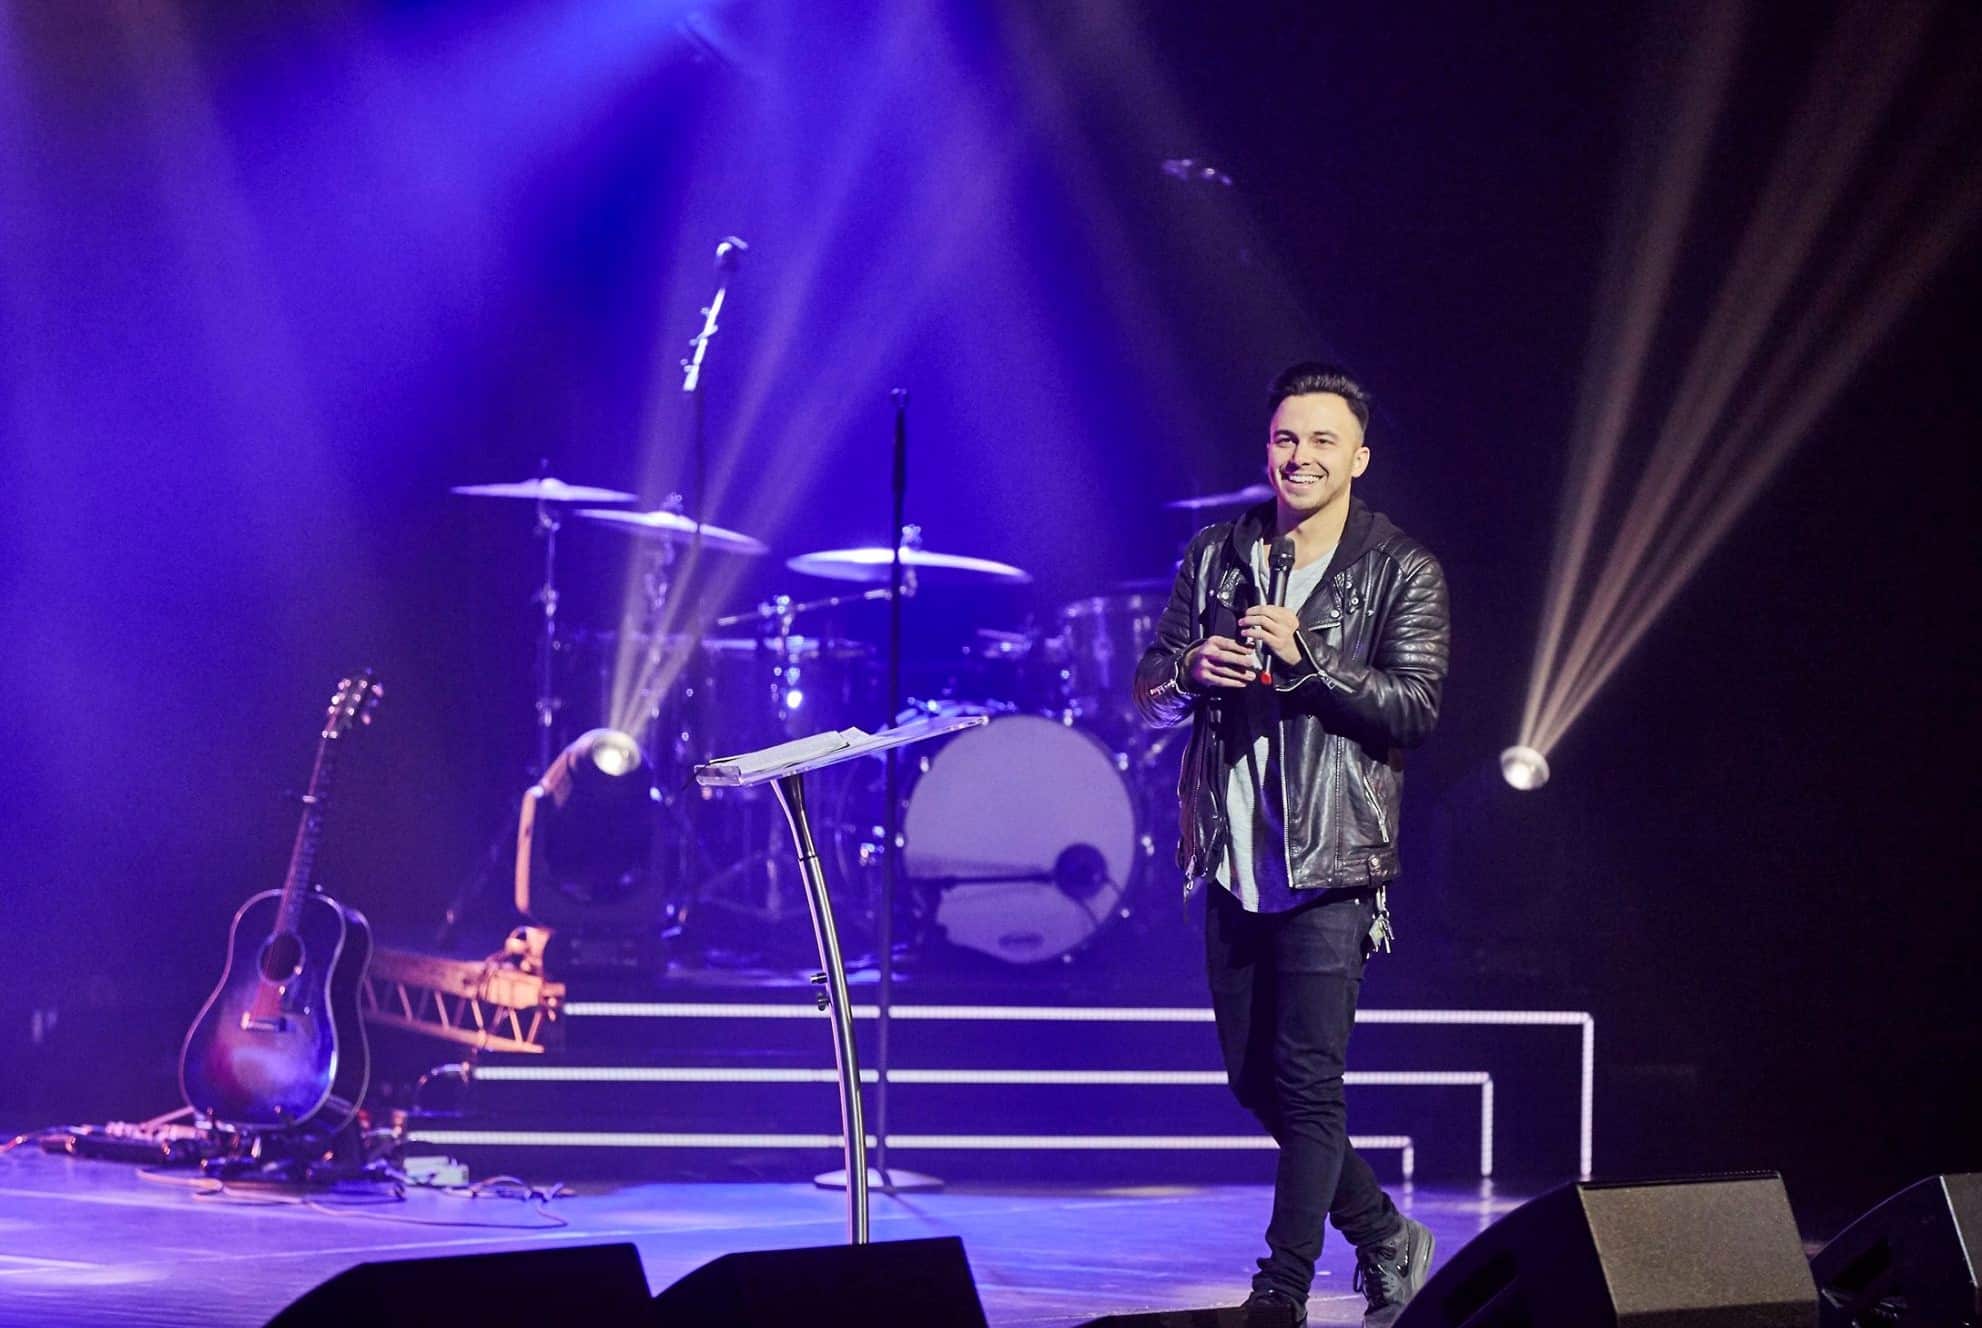 Hillsong London Campus Pastors Resign as Part of Ongoing Upheaval